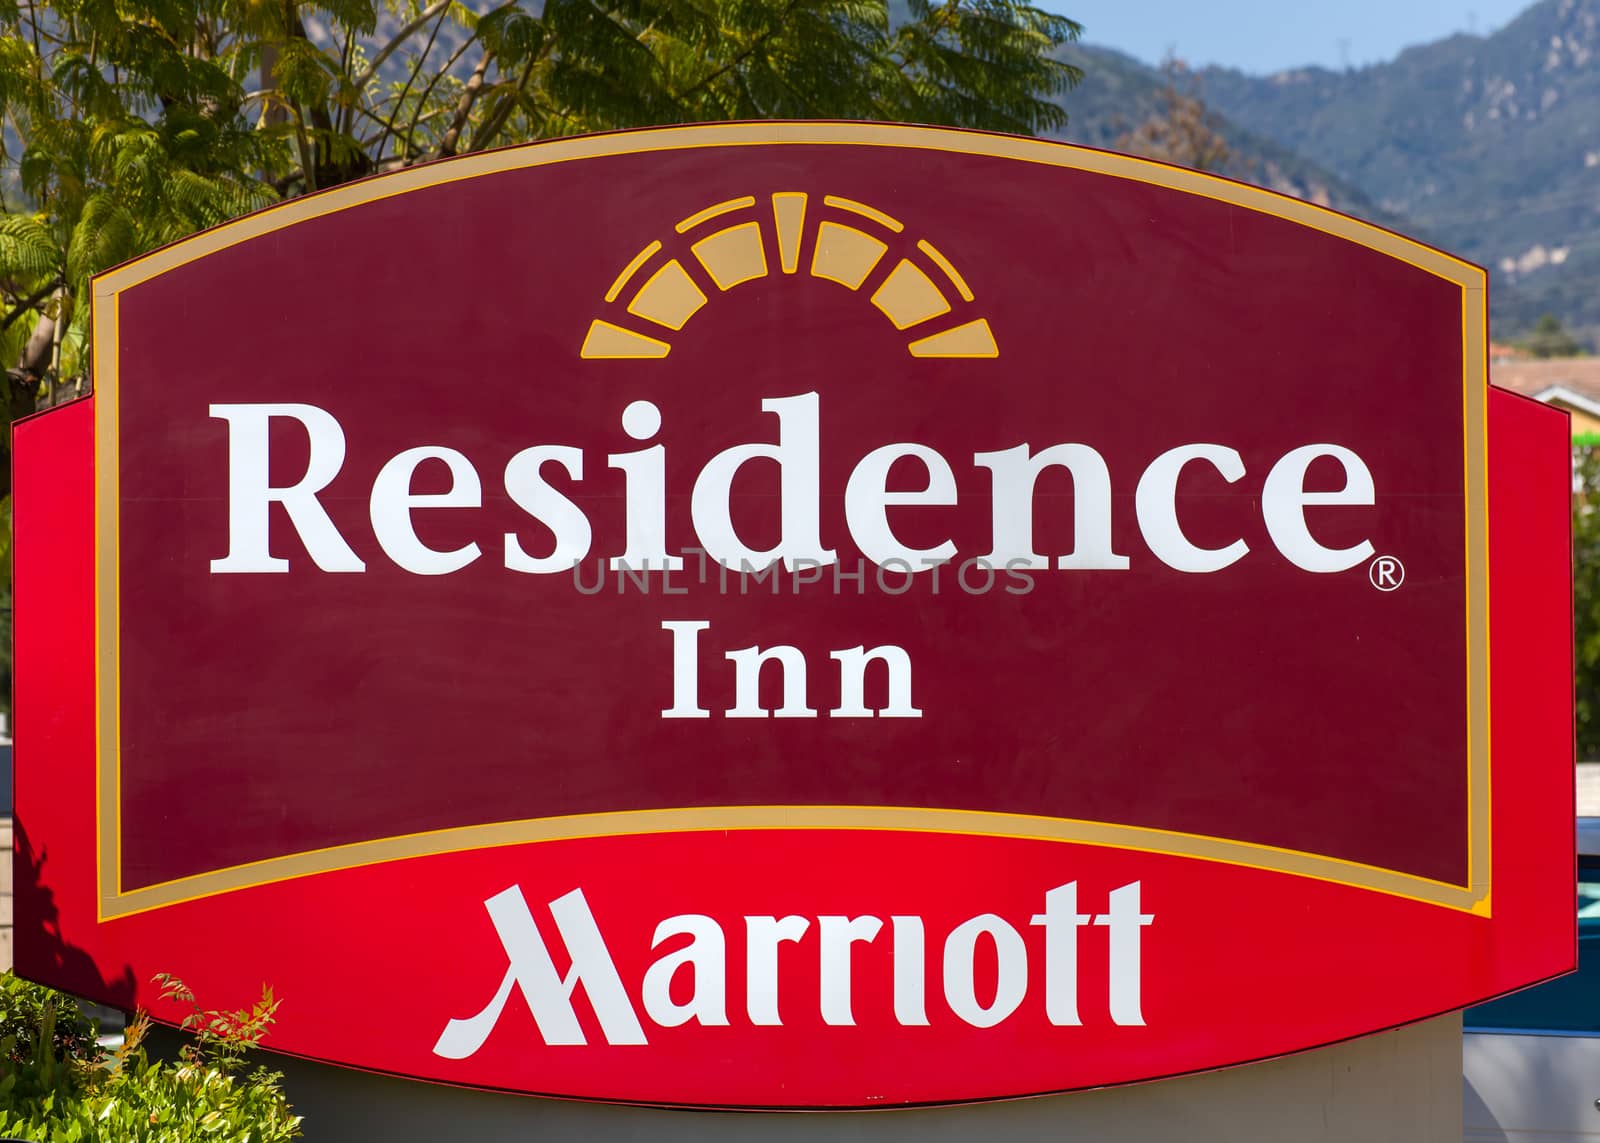 Residence Inn by Marriott Sign and Logo by wolterk